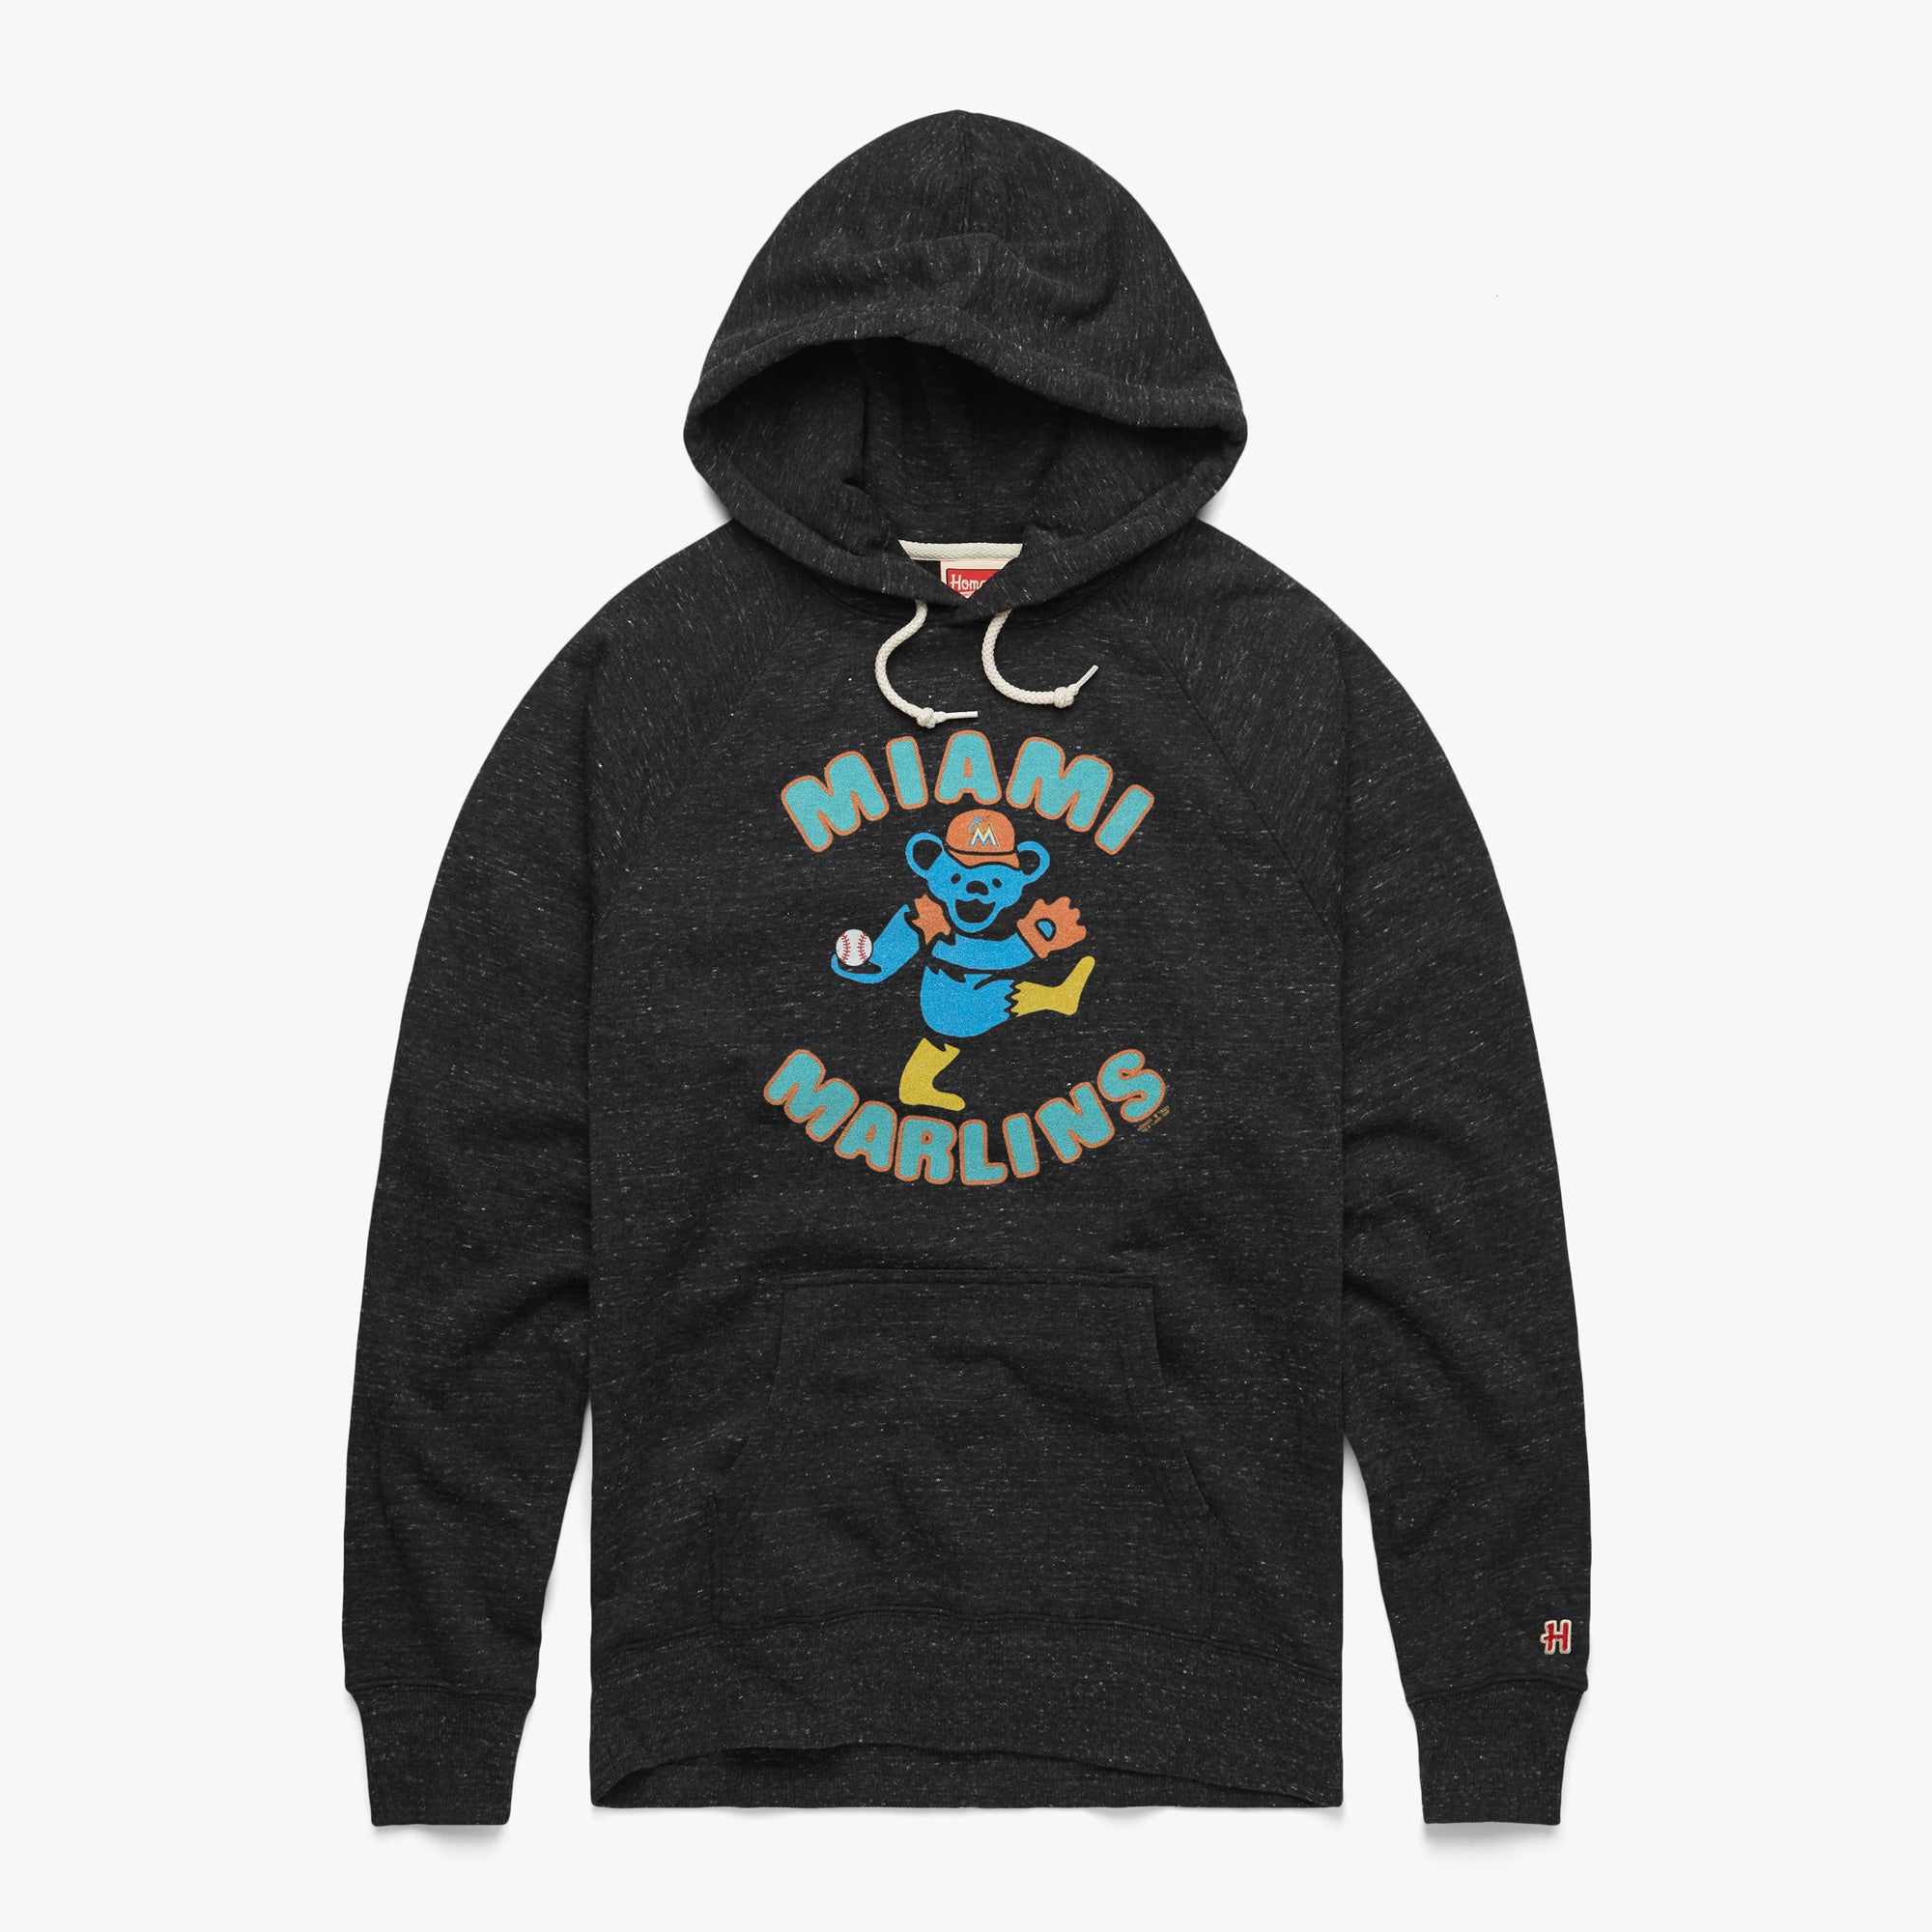 MLB x Grateful Dead x Marlins T-Shirt from Homage. | Teal | Vintage Apparel from Homage.